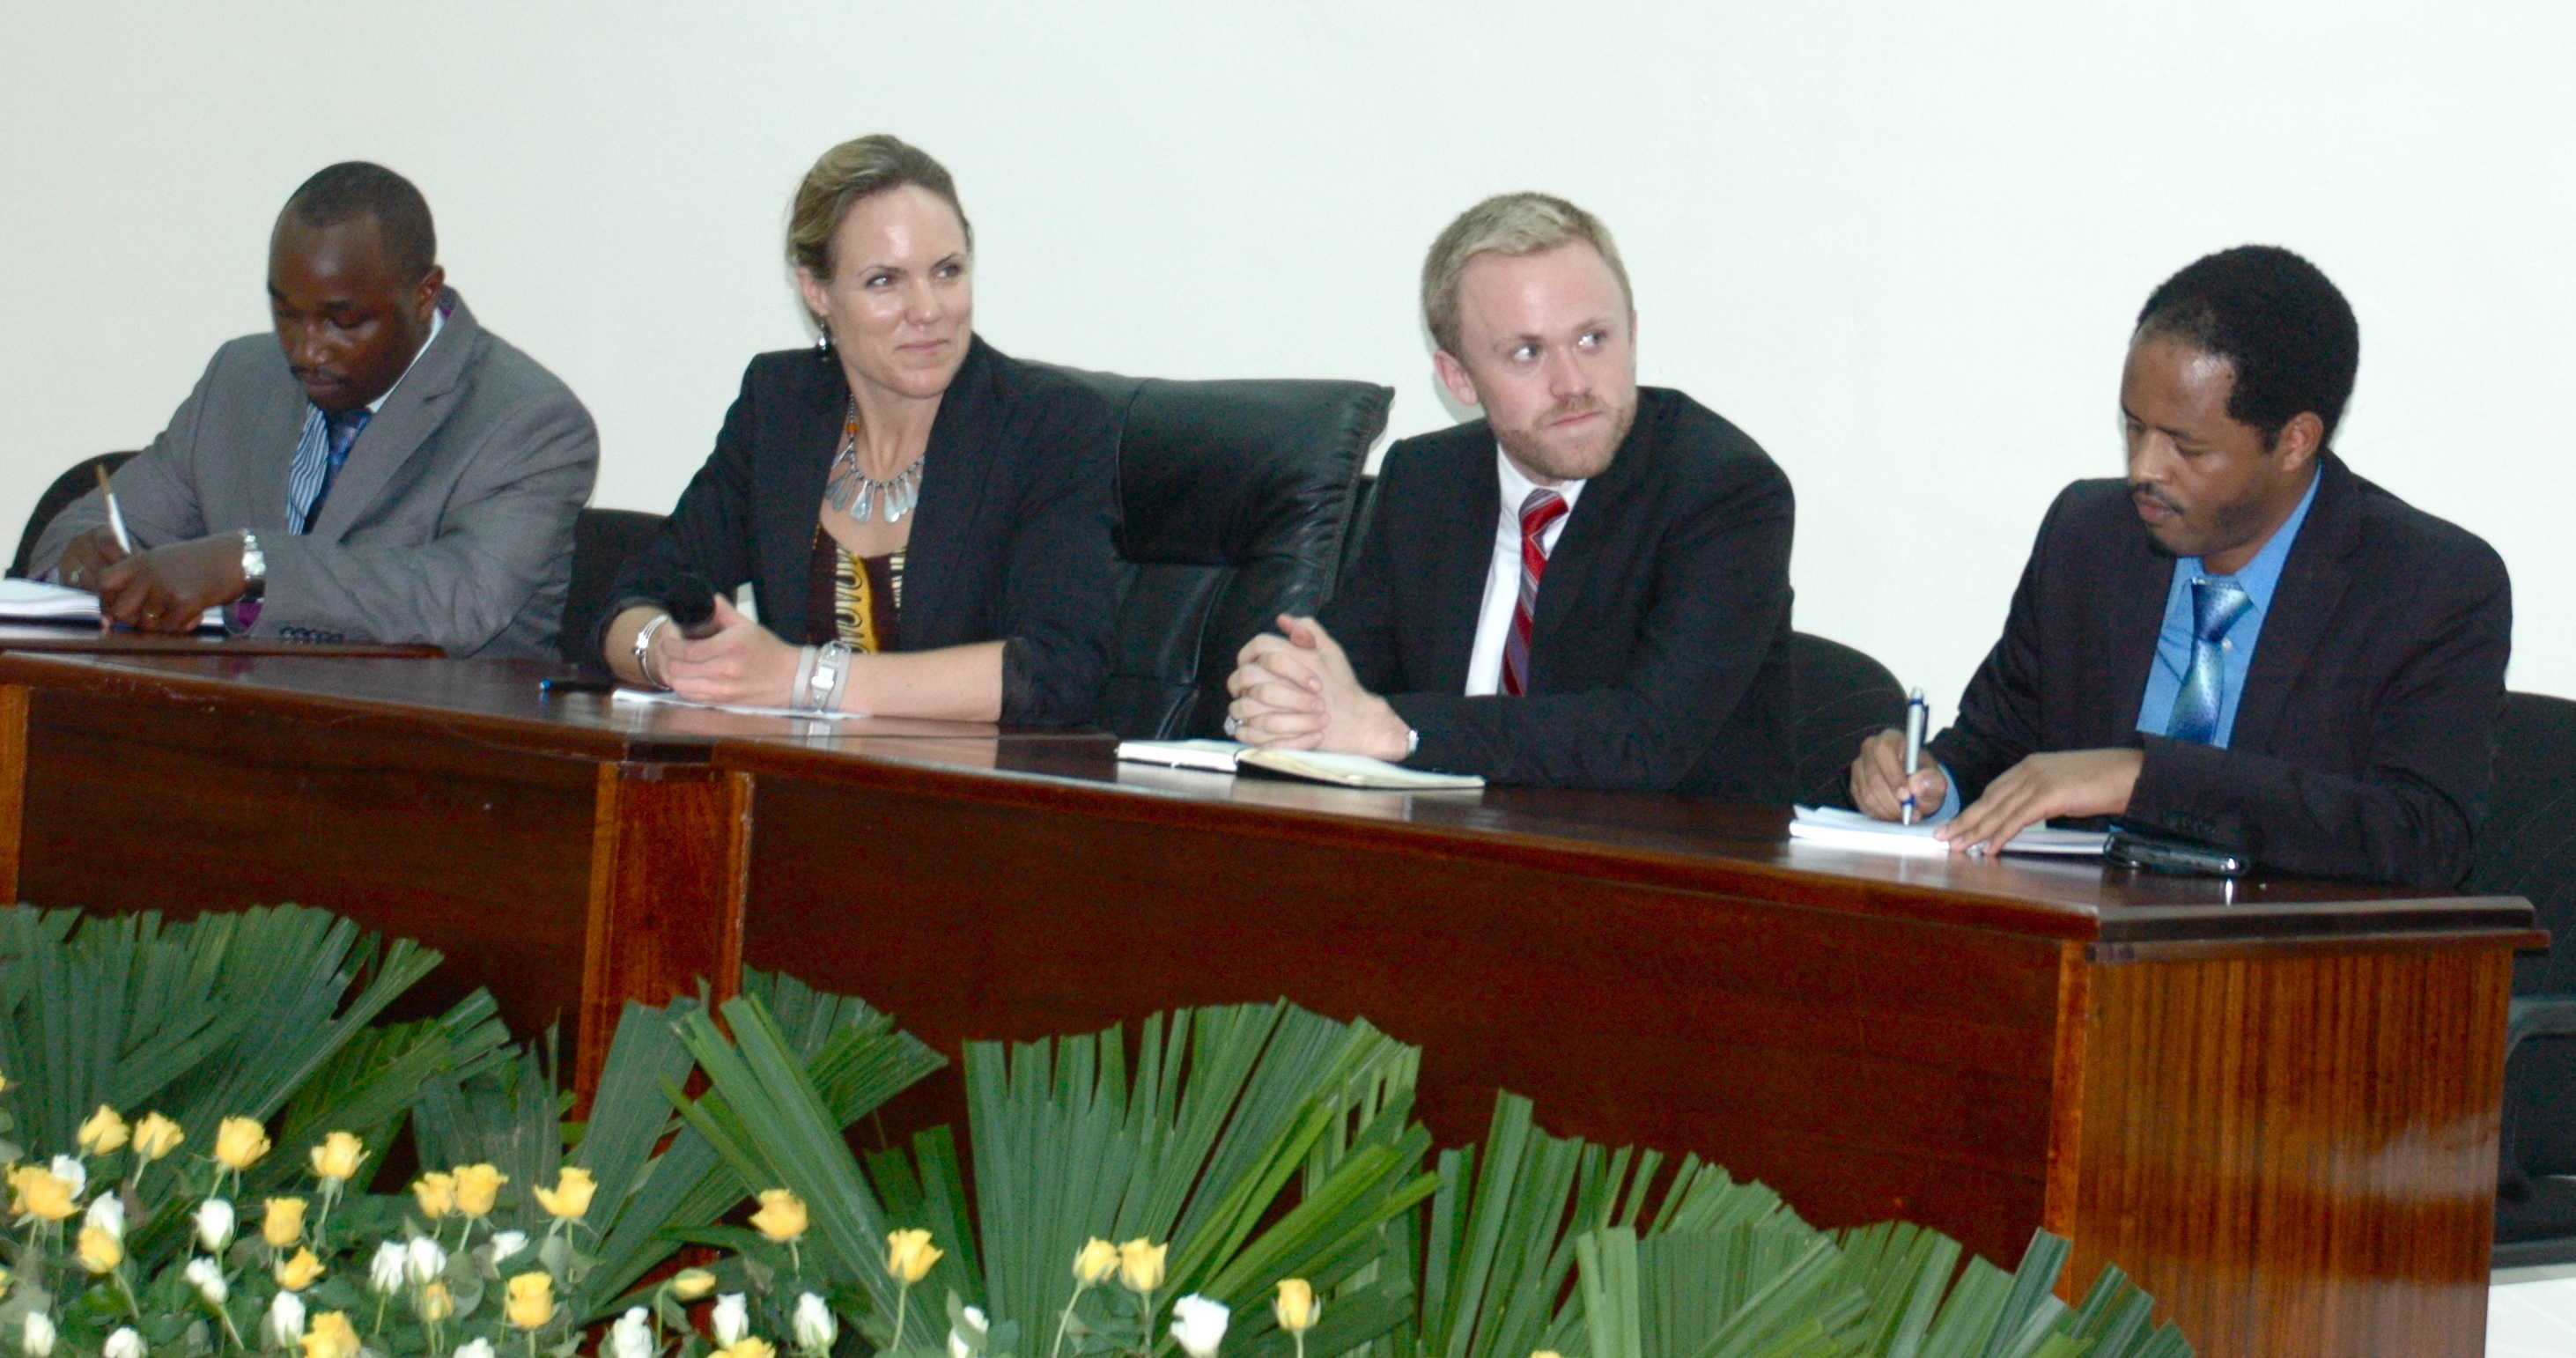 From left to right: Ministry of Education Director General for Science, Technology and Research Remy Twiringiyimana, GKI Chief Operating Officer Sara Farley, GKI Program Officer Andrew Gerard, and Rwanda National Science and Technology Commission Analyst Felly Kalisa speaking at May 2 workshop